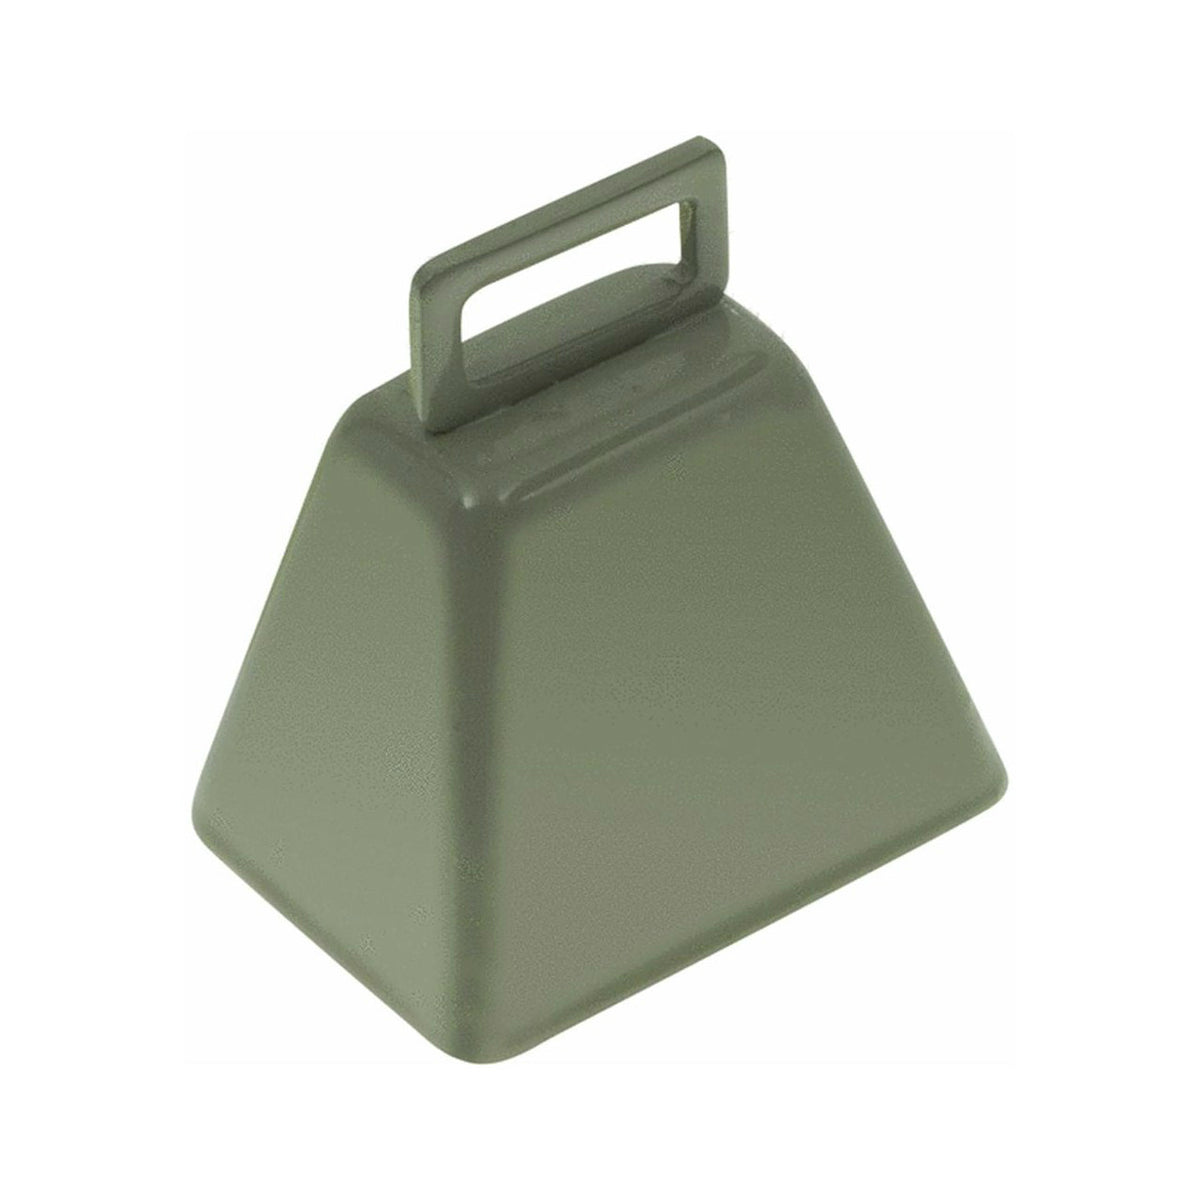 Speeco S90071200 Long Distance Cow Bell, 4-1/8"